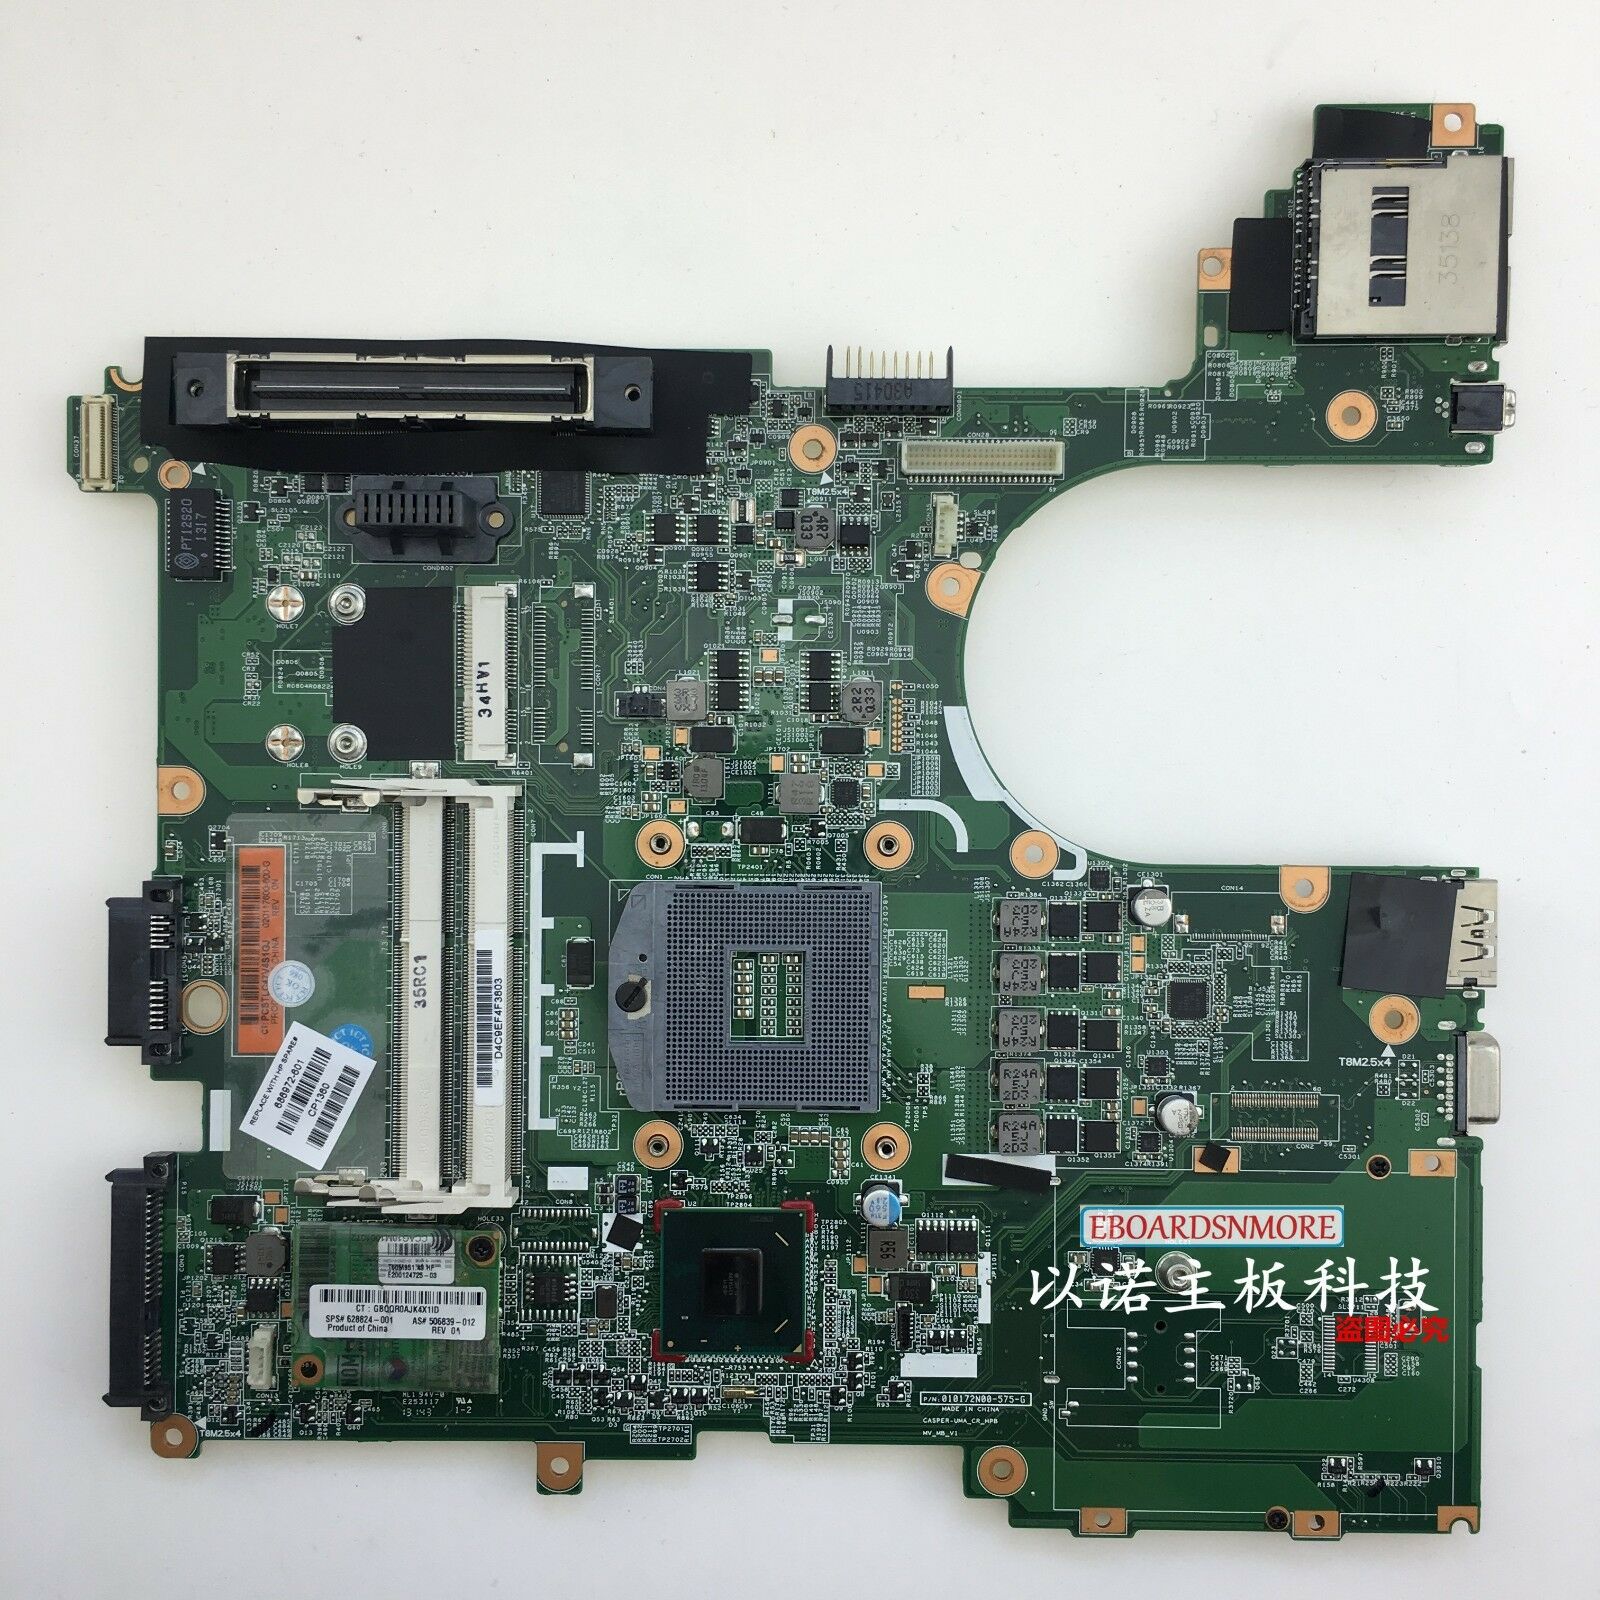 686972-601 686972-001 Motherboard for HP Probook 8570B Laptop Intel HD Graphic A Compatible CPU Brand: Inte